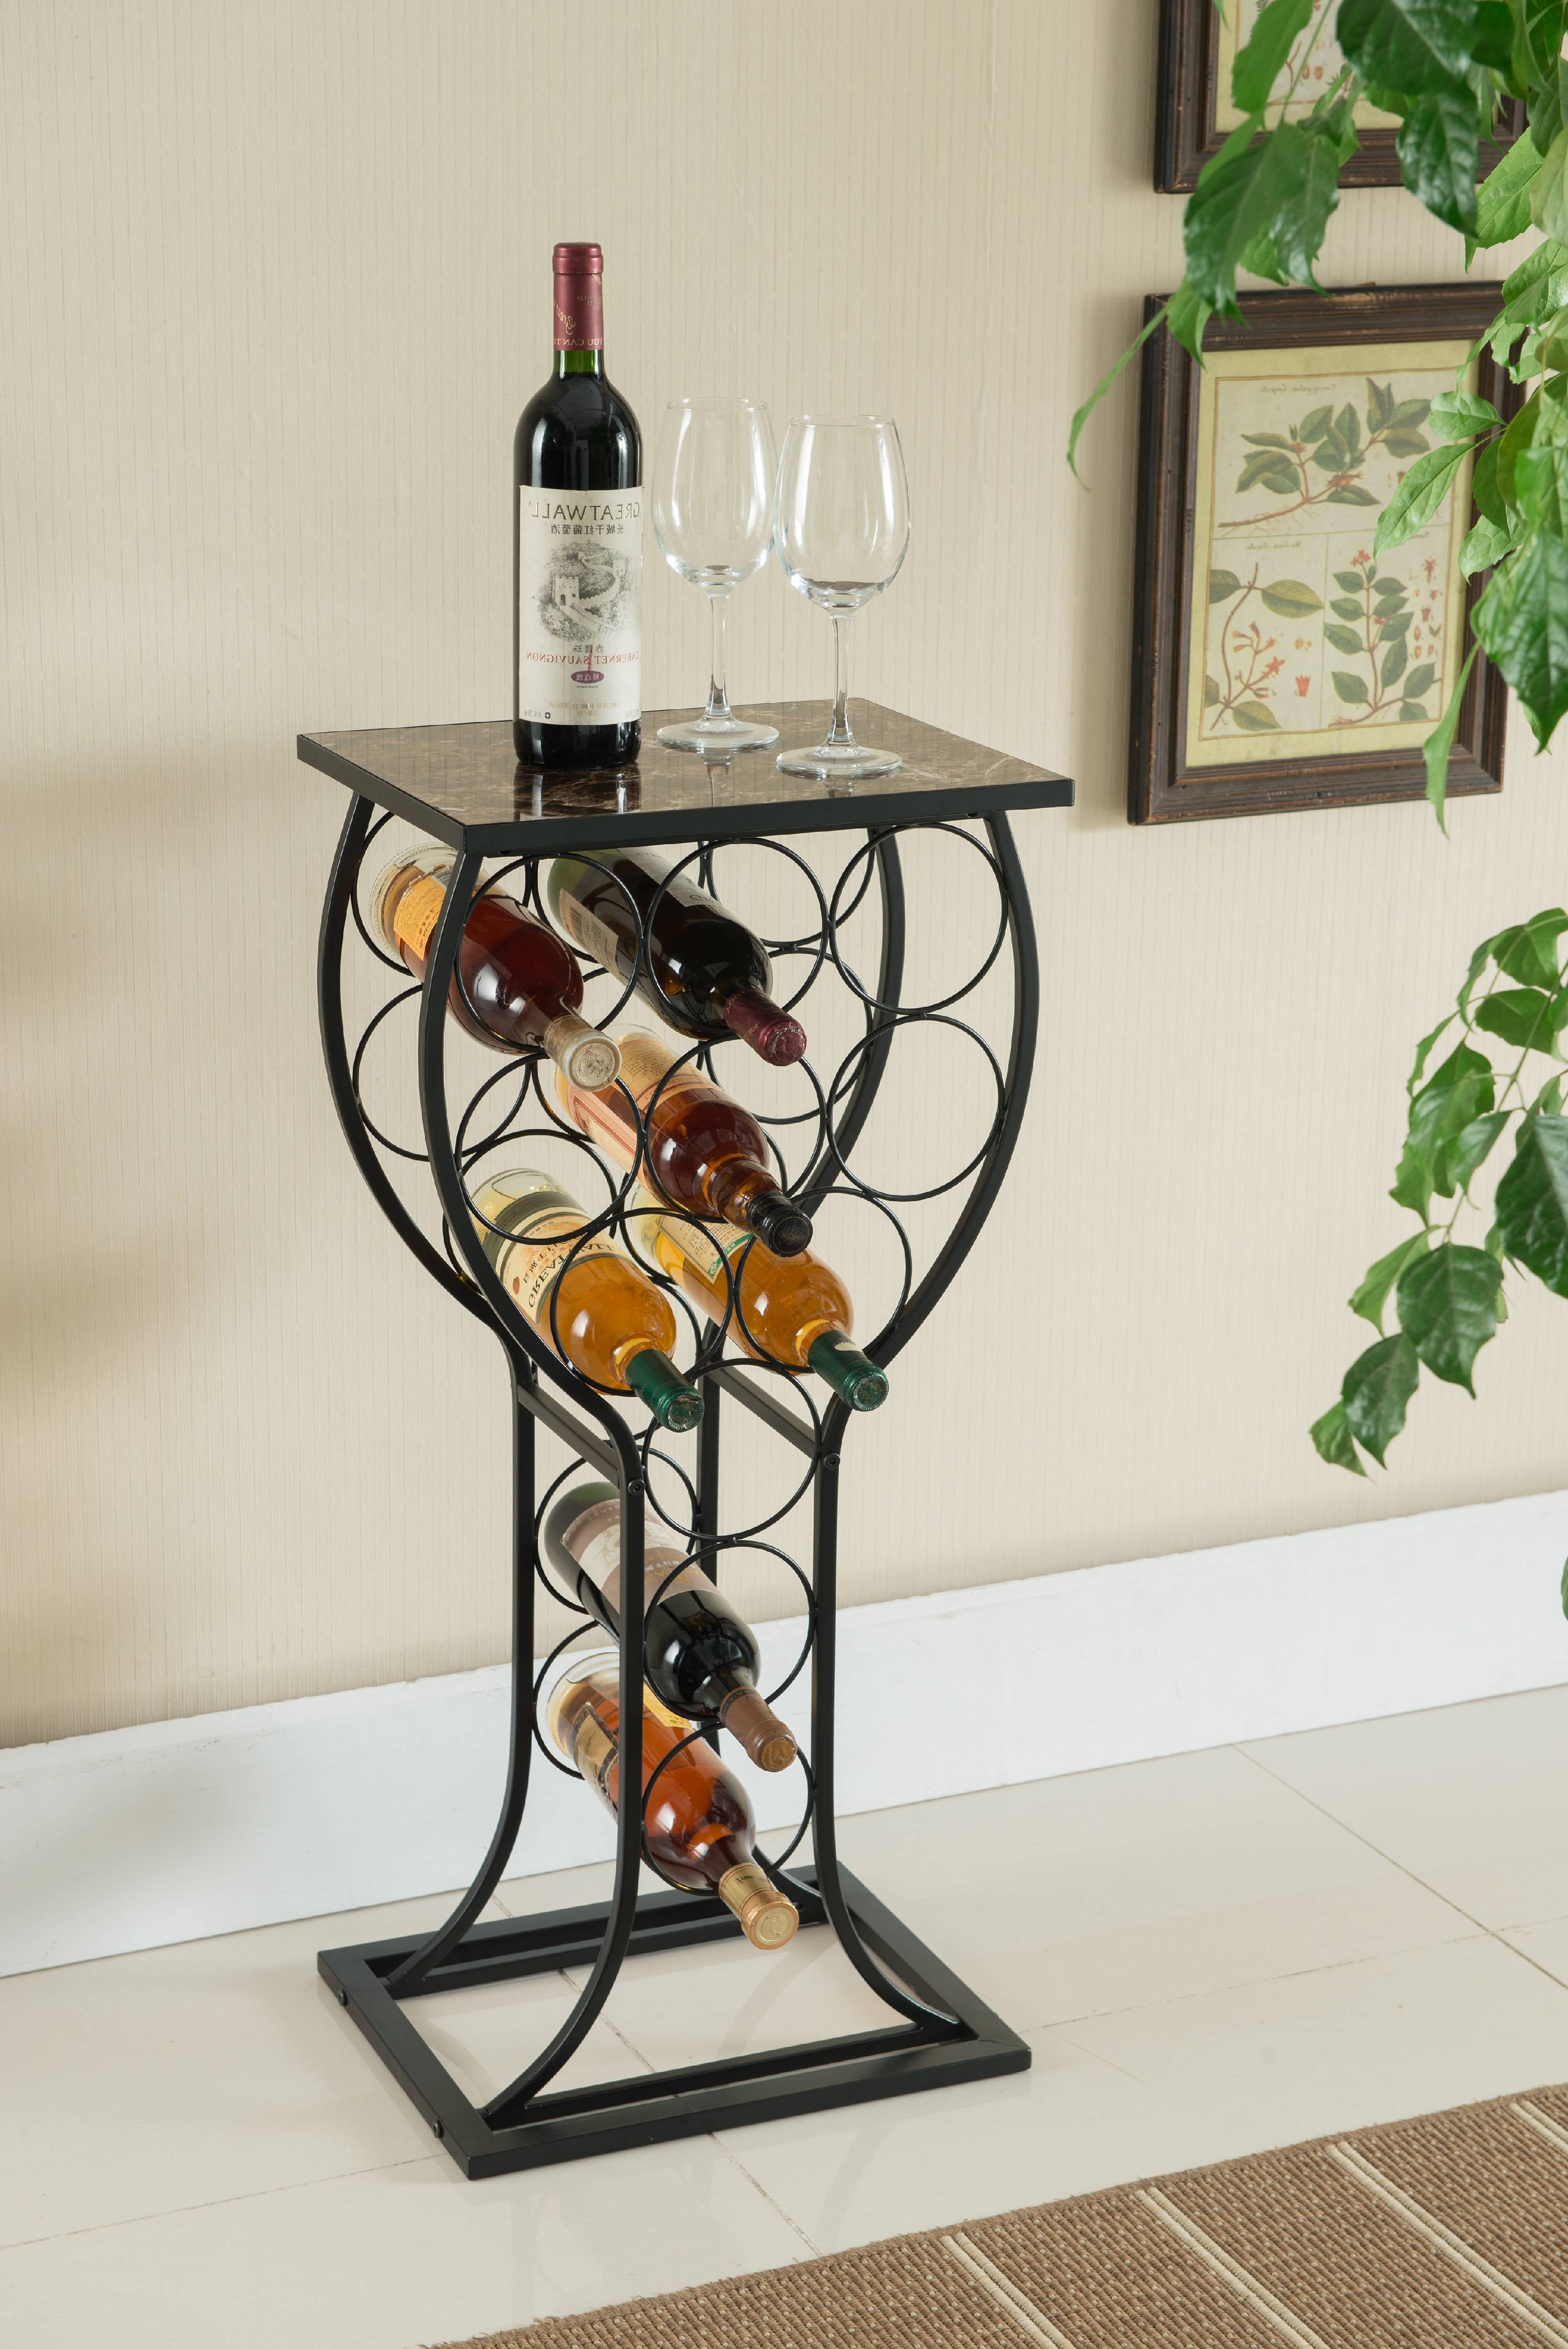 Wrought Iron Annabel 6 Bottle Metal Wine Rack for Tabletop or Countertop by KitchenEdge Free Standing Black